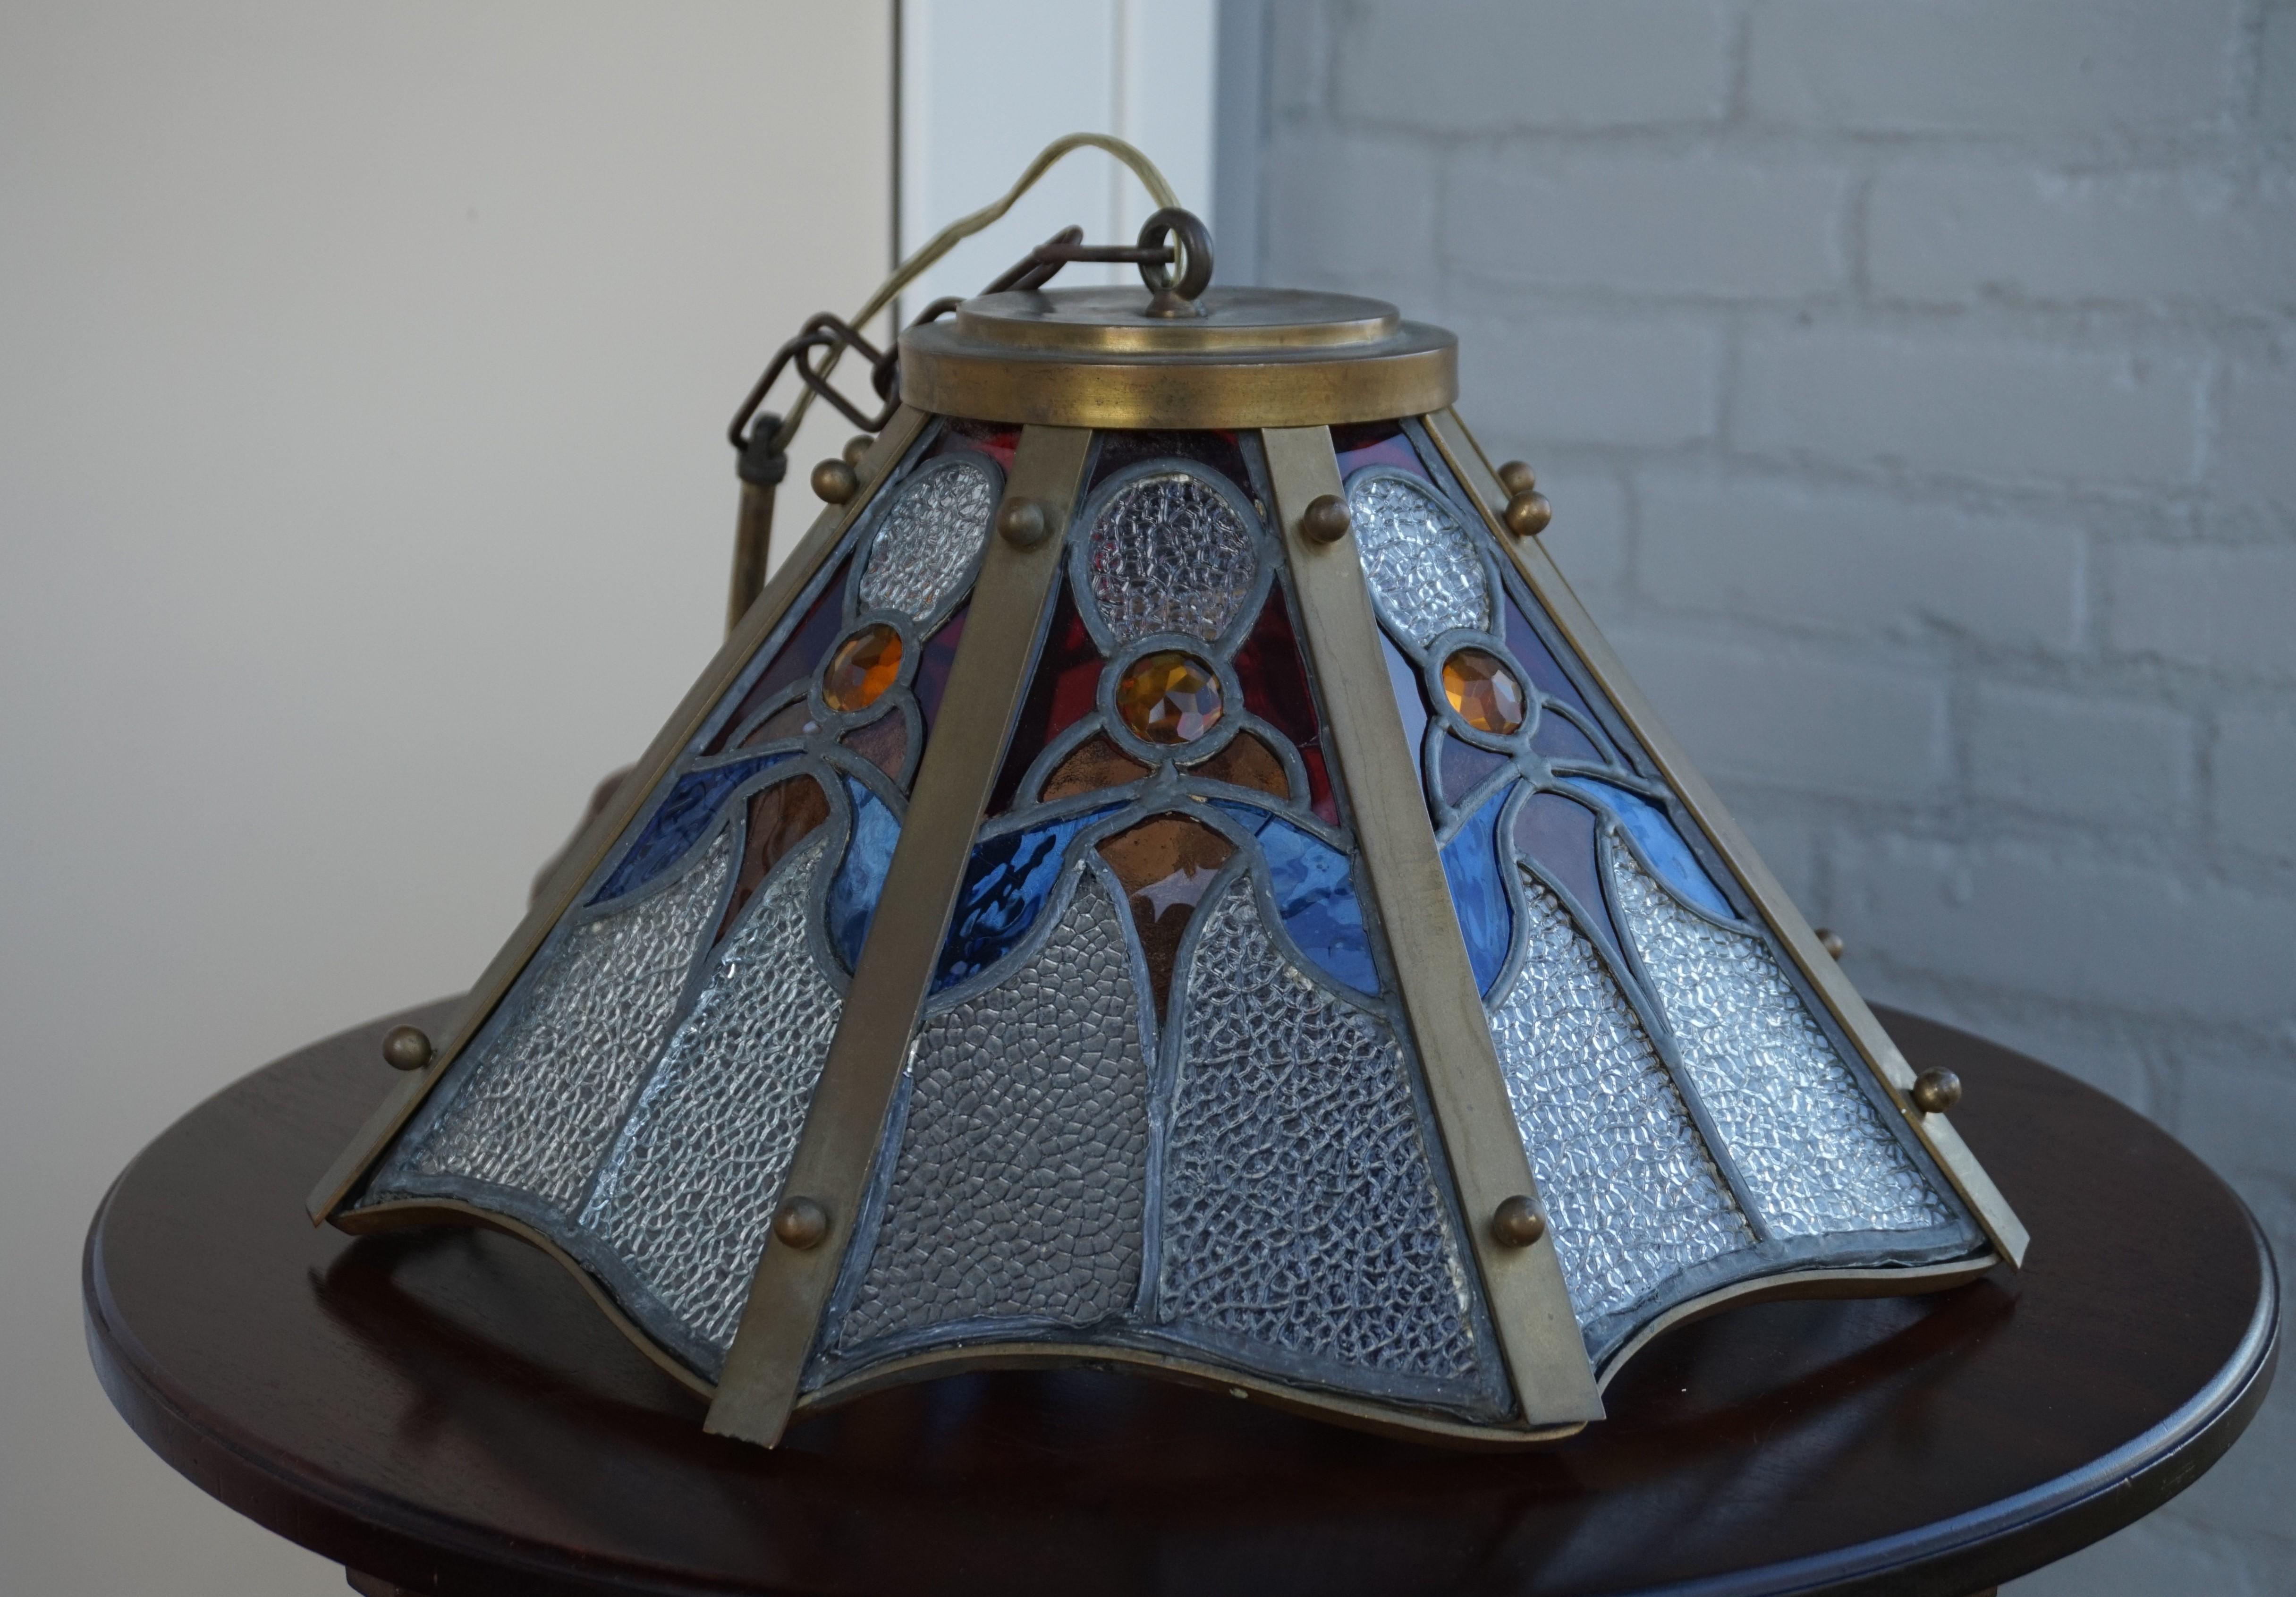 One of a kind and all-handcrafted antique pendant.

This antique light fixture comes with a beautiful Arts & Crafts motif in each of its eight stained glass panels. Both in terms of colors and shape, the stylized flower motif really is a joy to